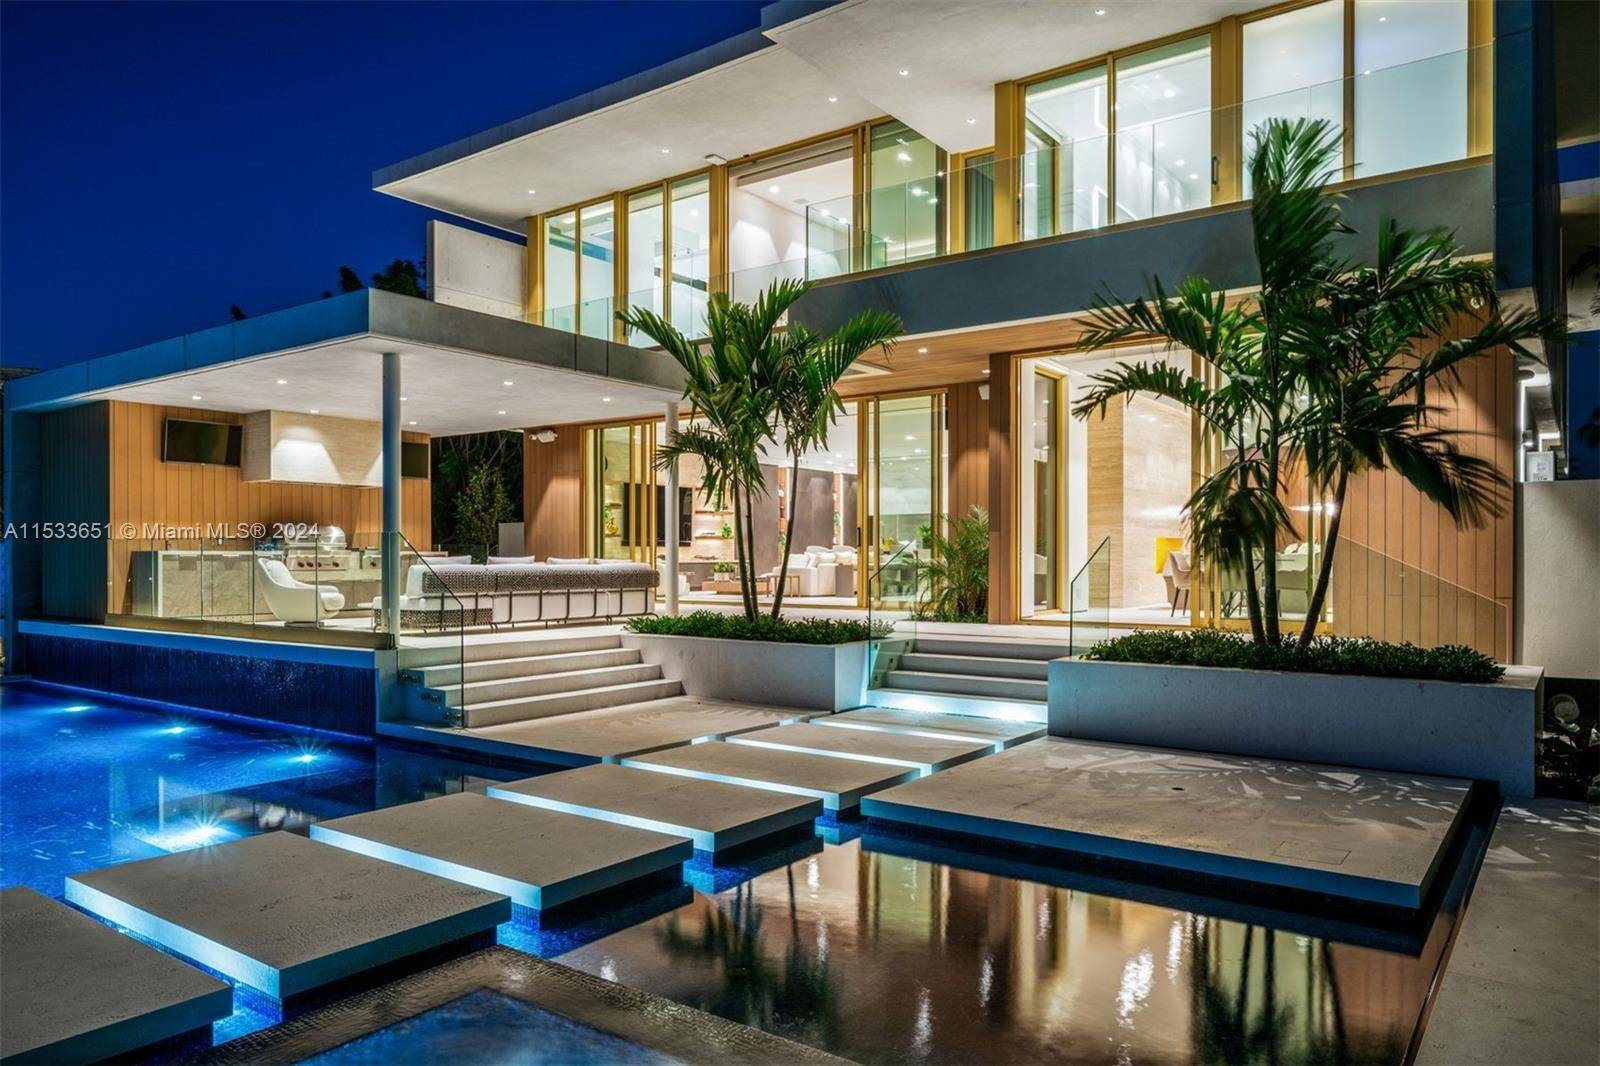 Discover refined living at 6494 Allison Rd, Miami Beach a turnkey gated western waterfront island residence boasting 6 beds and 8.